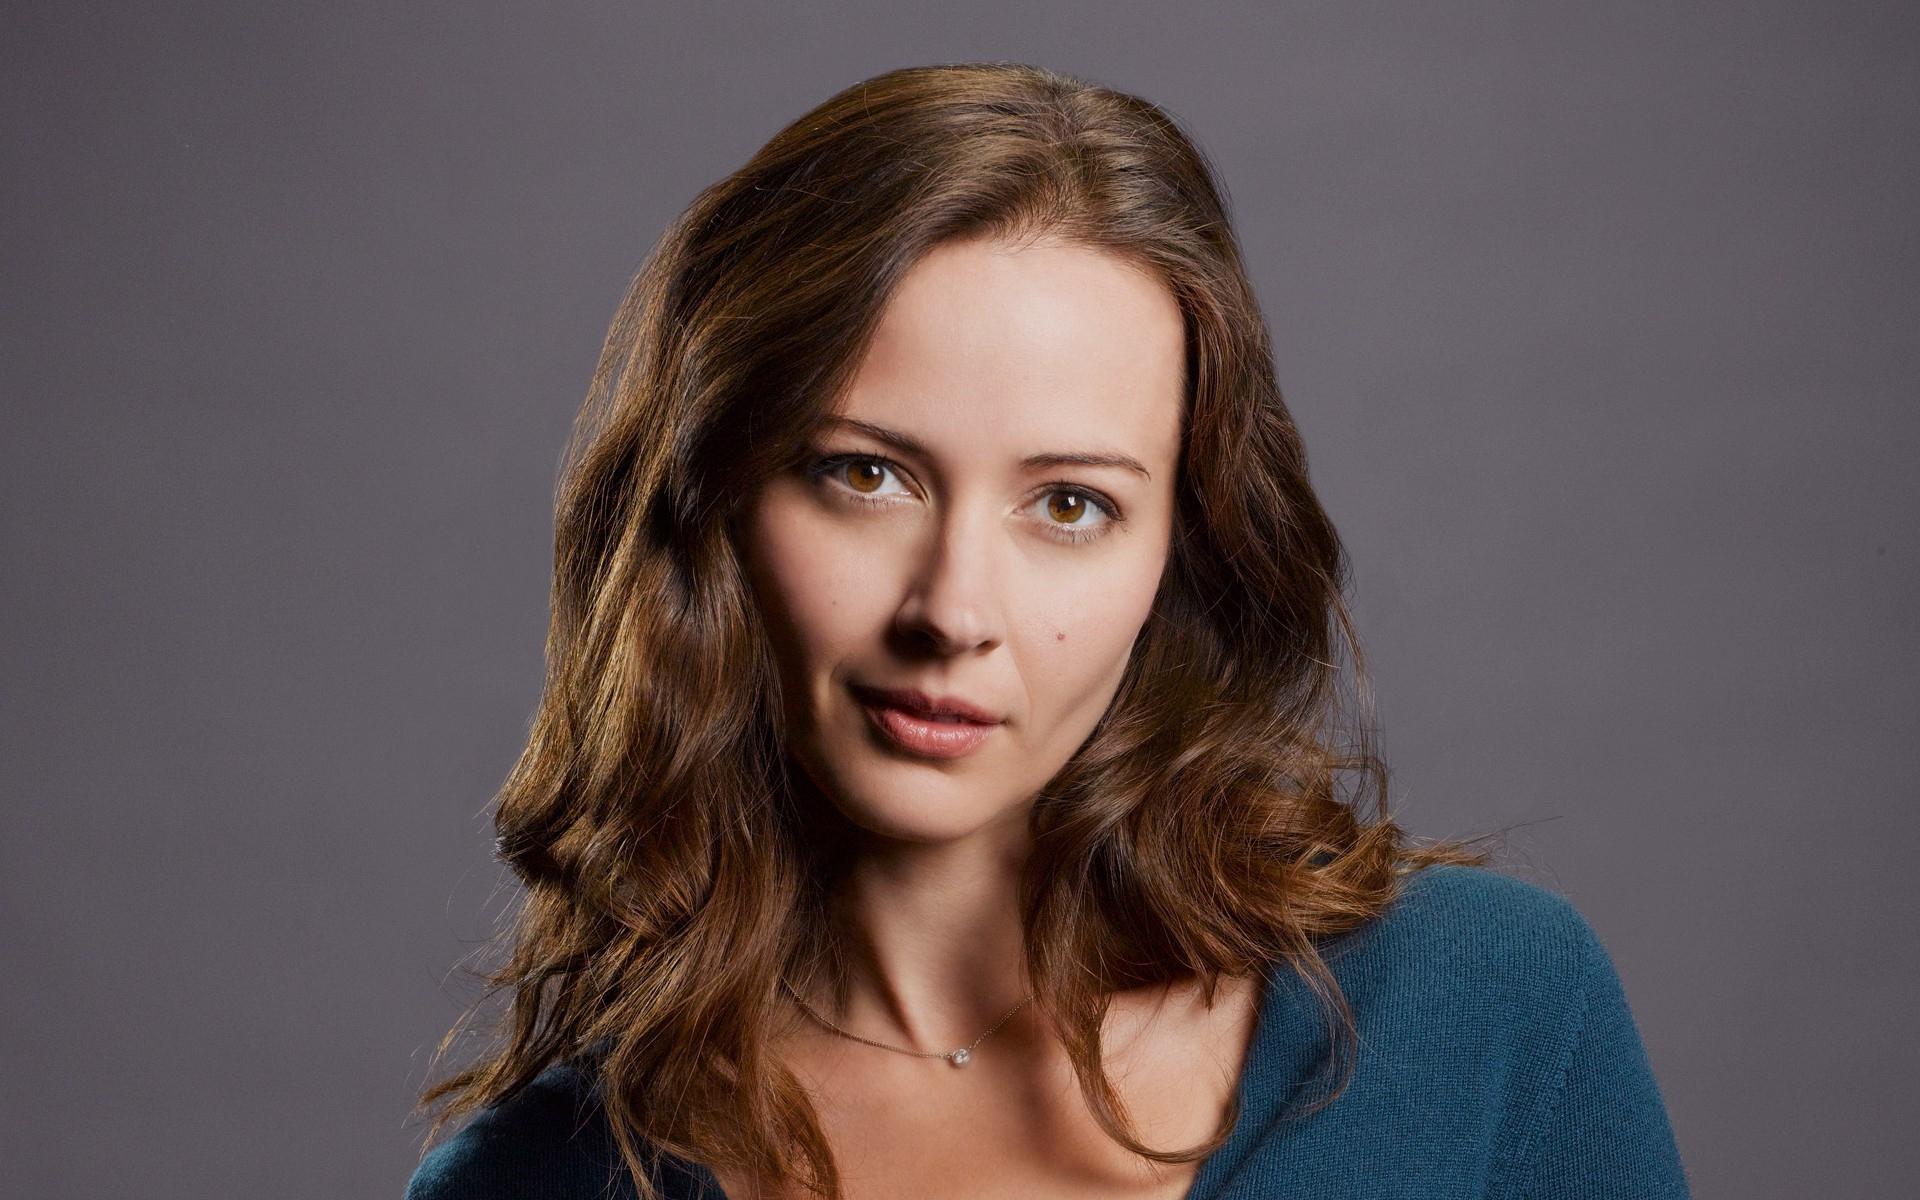 Amy Acker Wallpapers Image Photos Pictures Backgrounds.